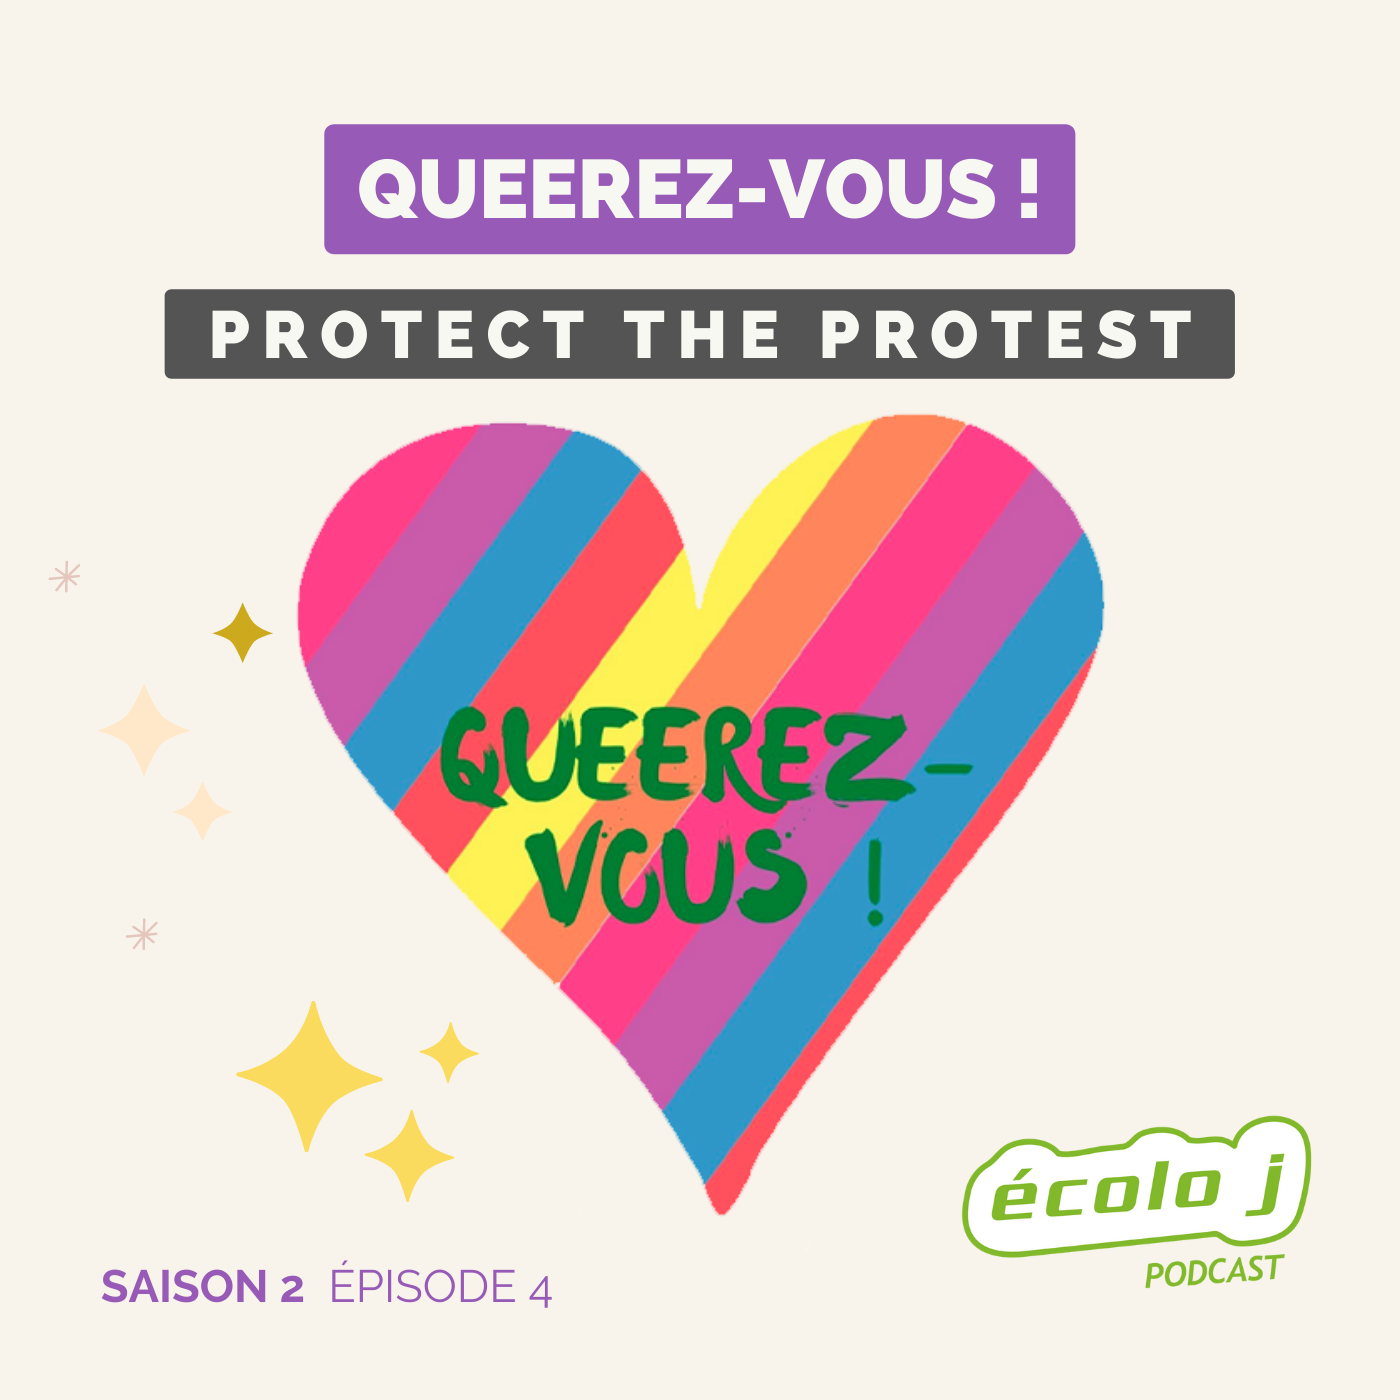 Queerez-vous ! S2E4 : Protect the protest...but from what ? From who ?